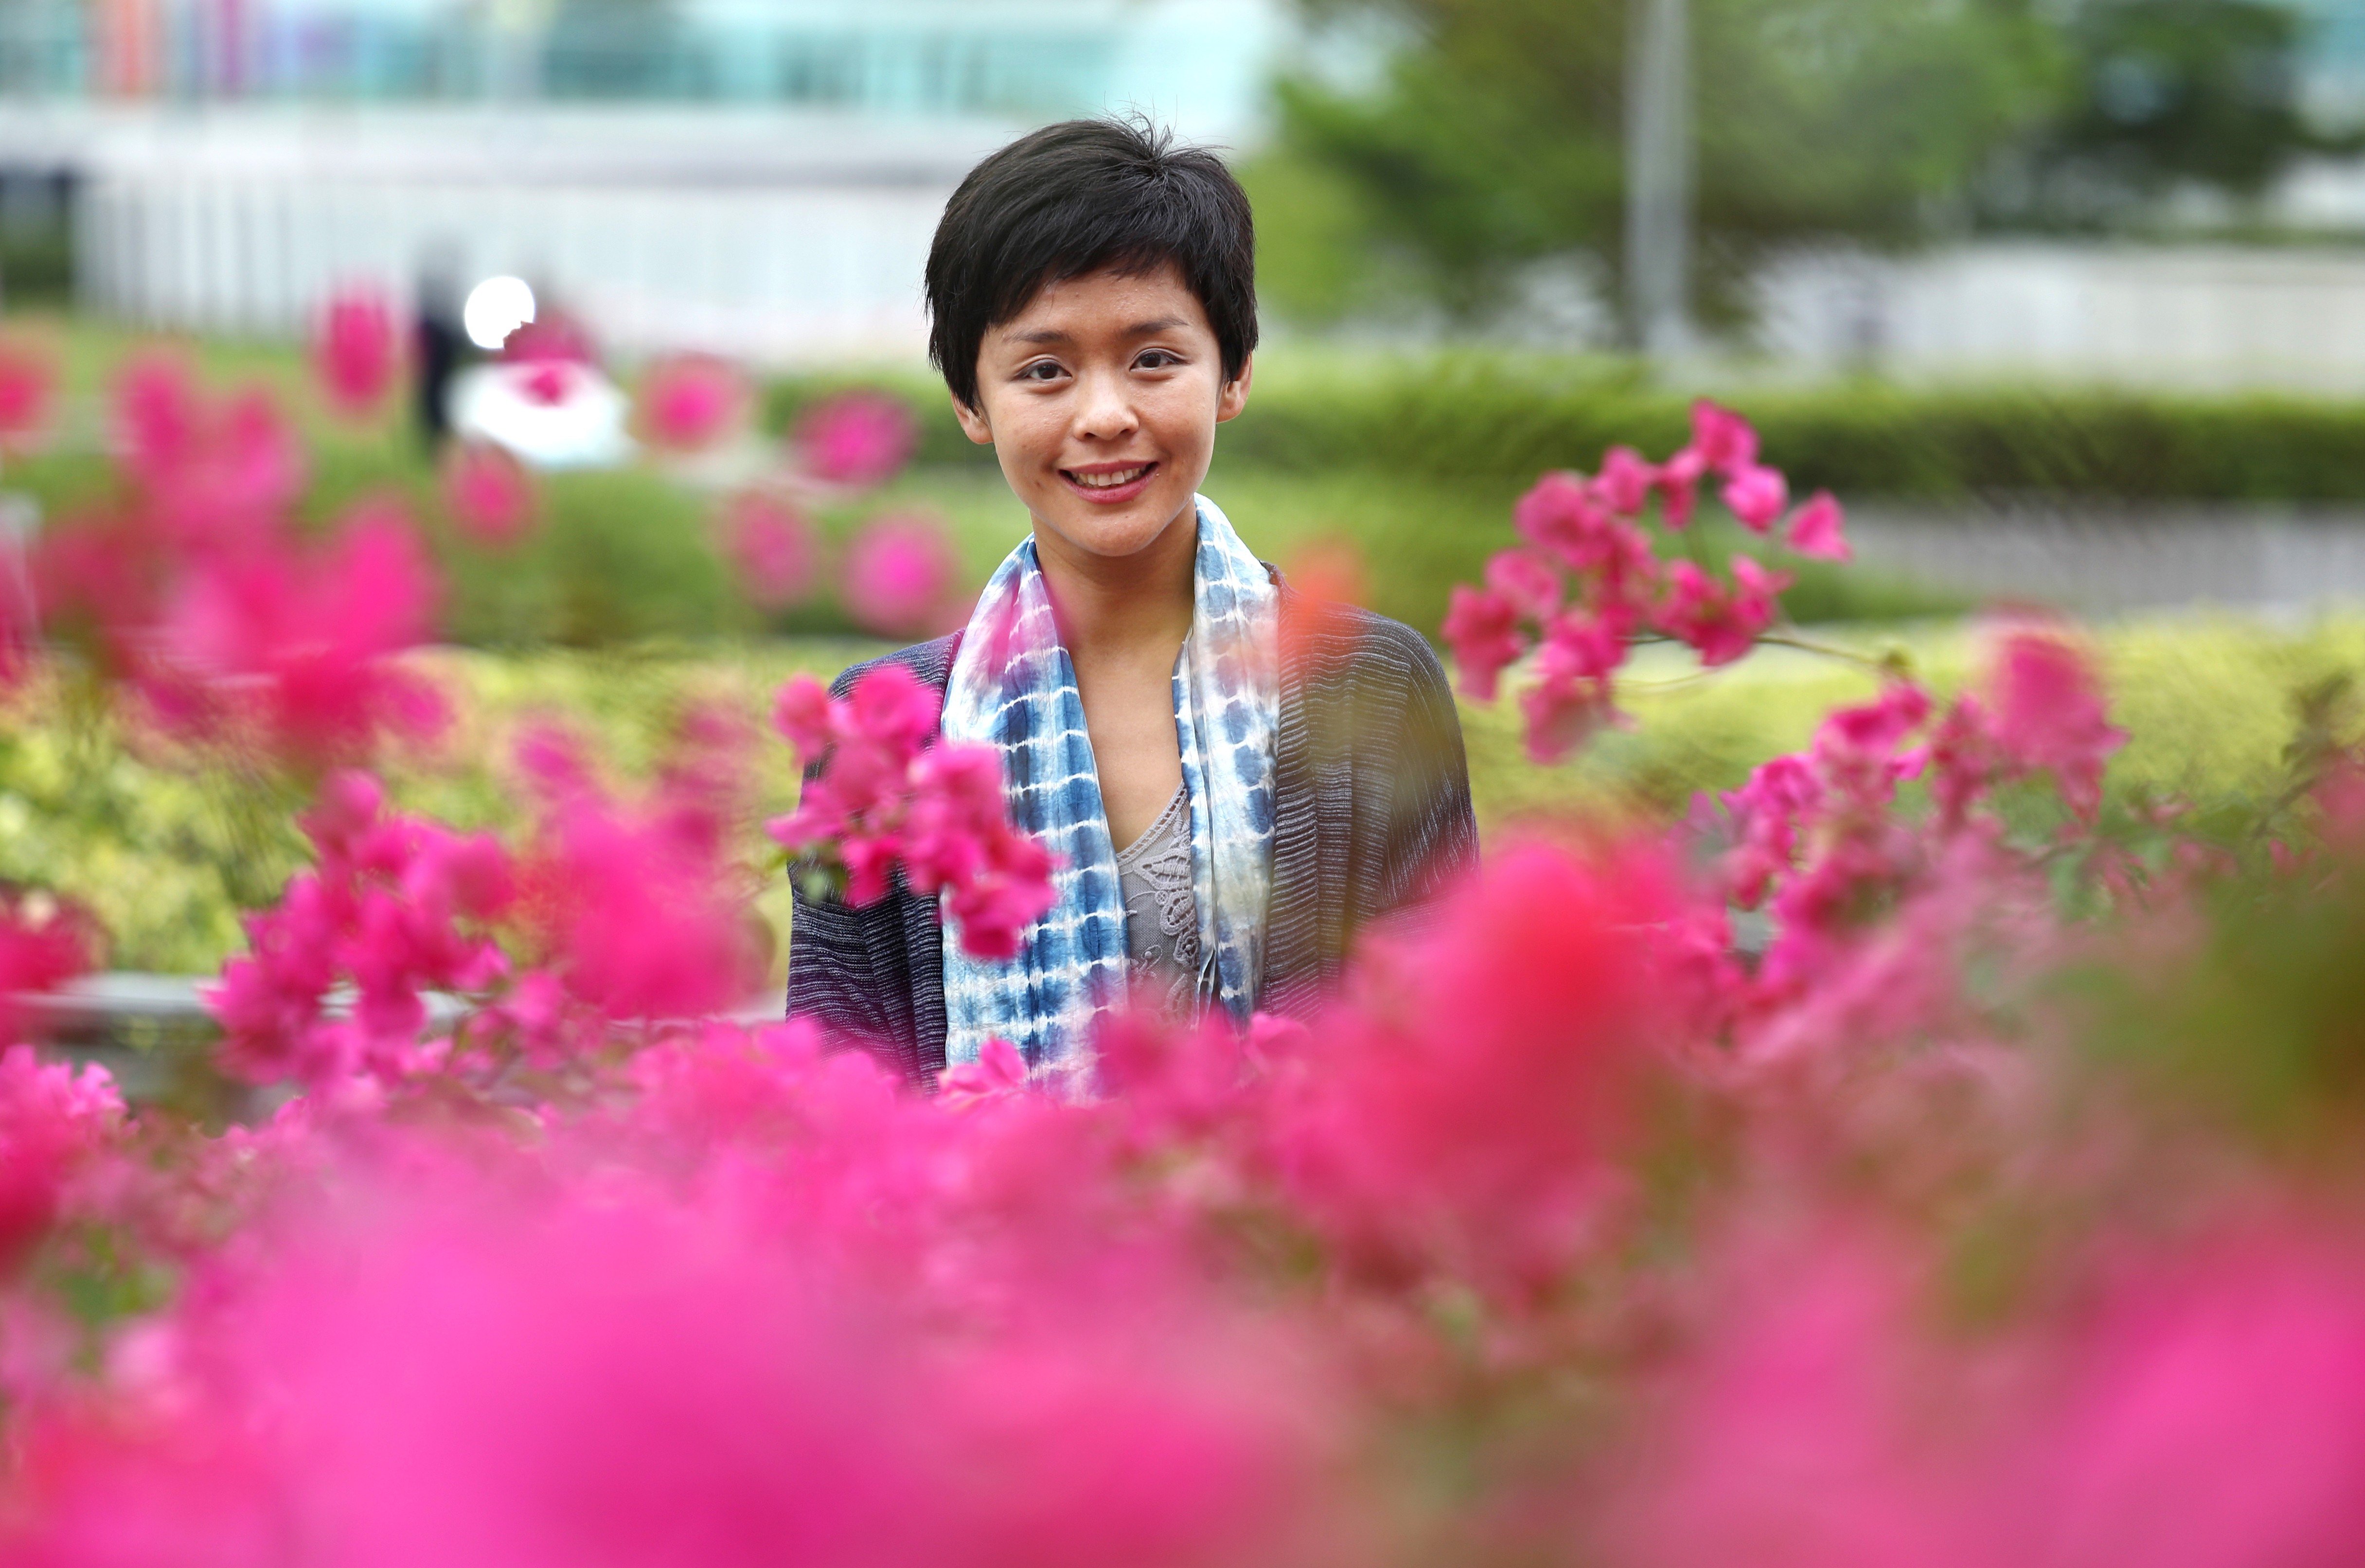 Hong Kong social entrepreneur Keilem Ng is now a director at Asian Venture Philanthropy Network, a Singapore-based funding network that builds and promotes investment in social projects across Asia. Photo: Nora Tam